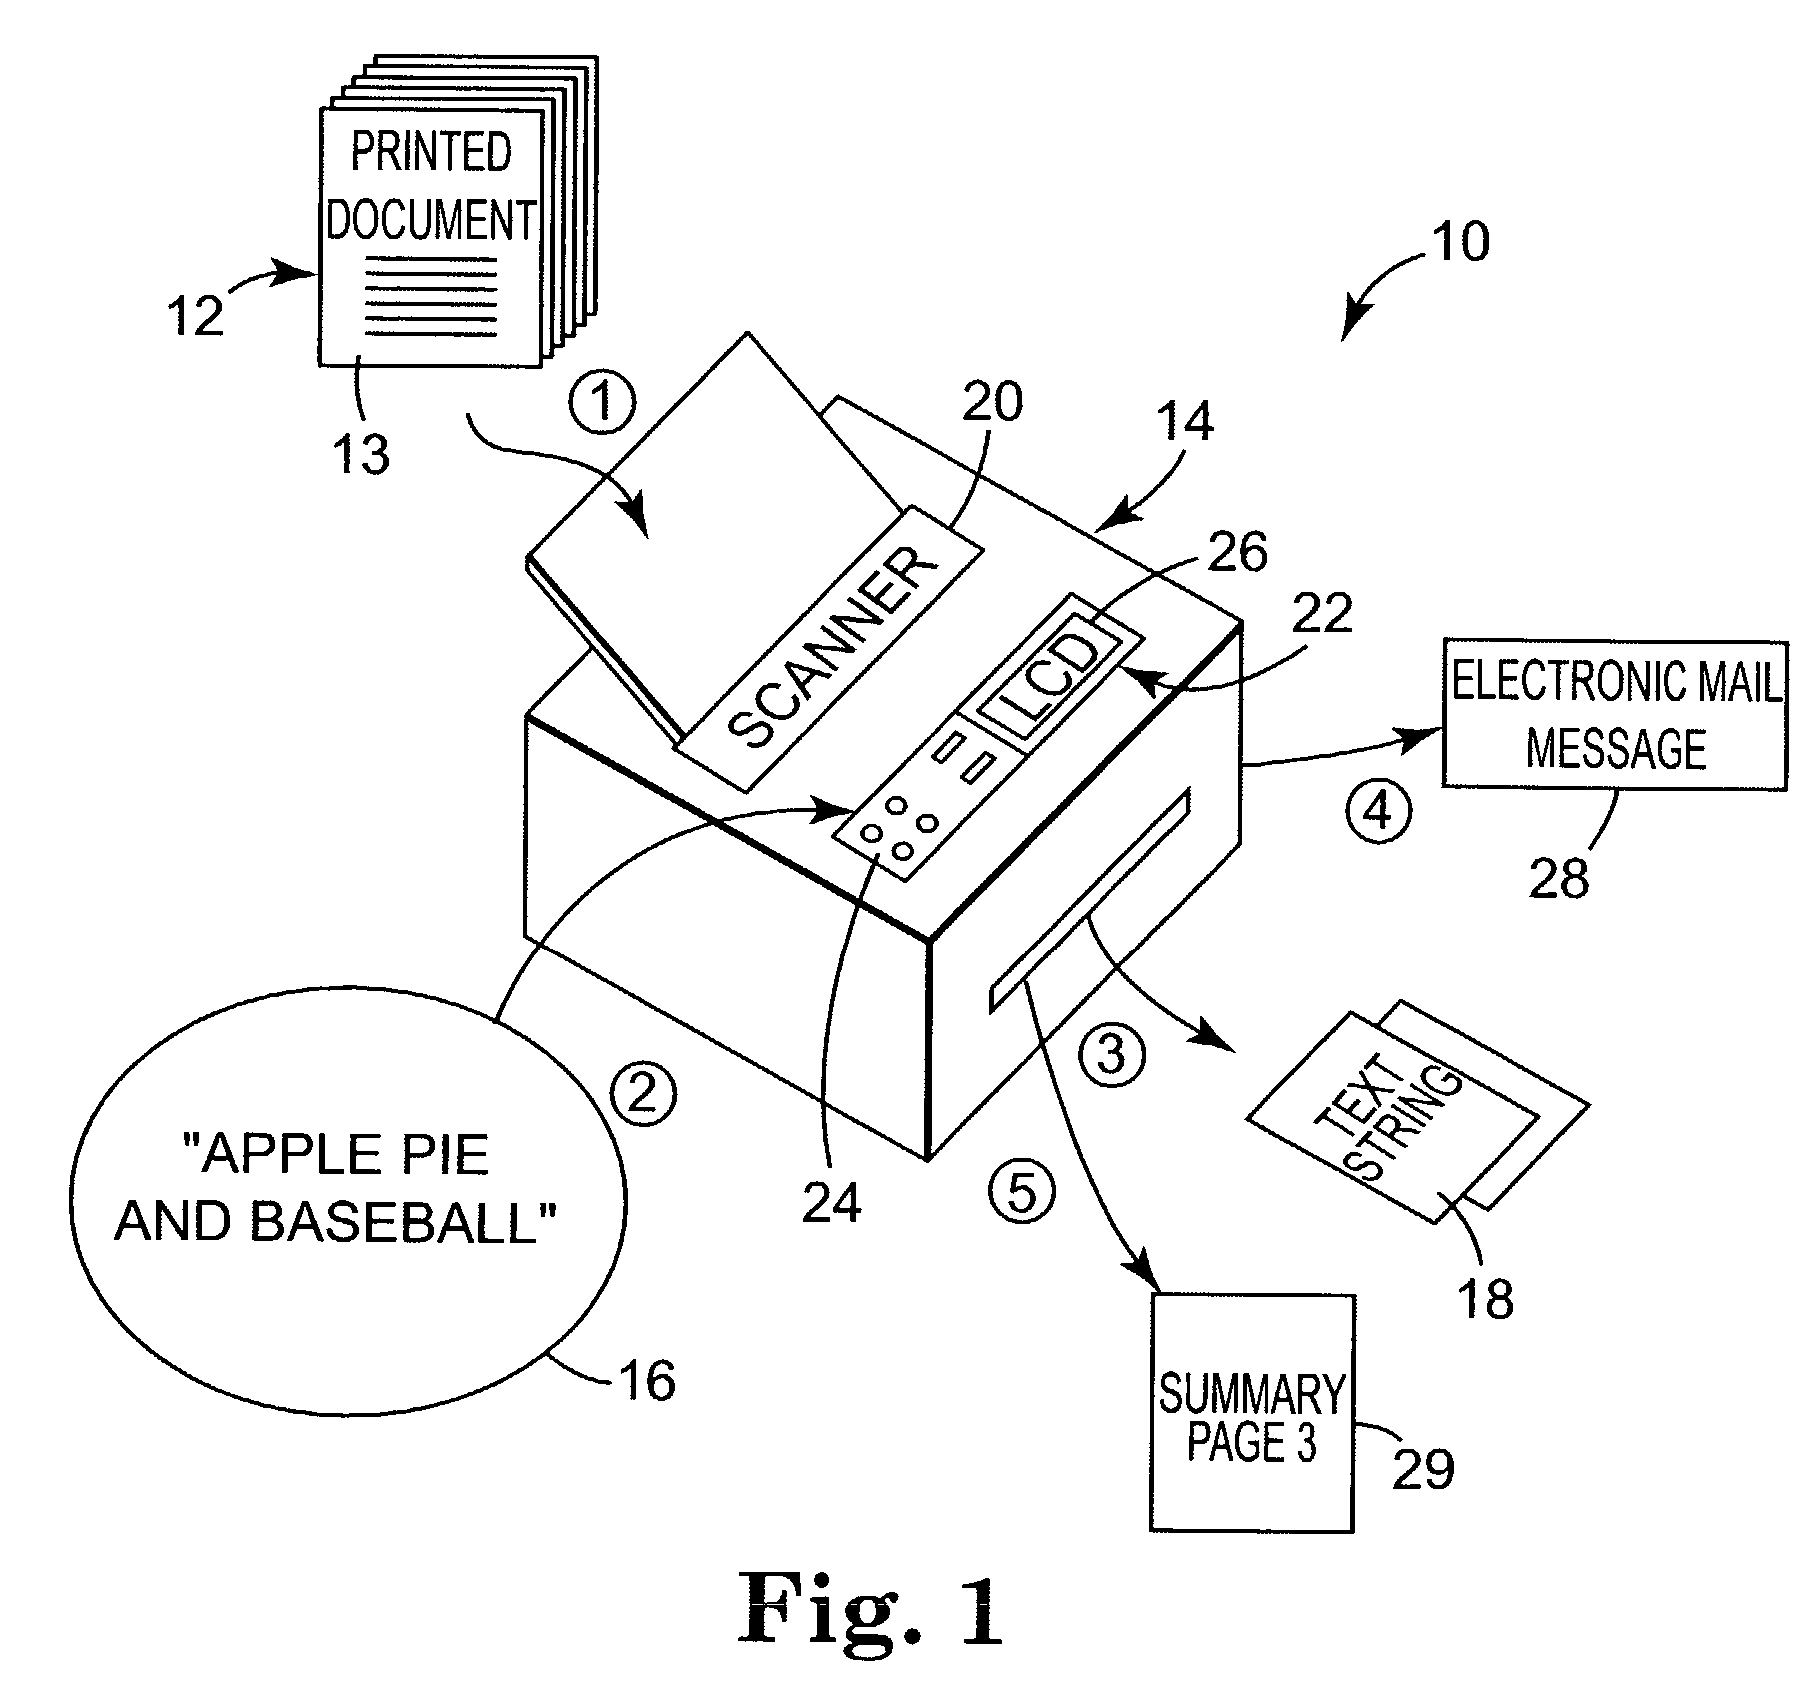 Method and system of using a multifunction printer to identify pages having a text string